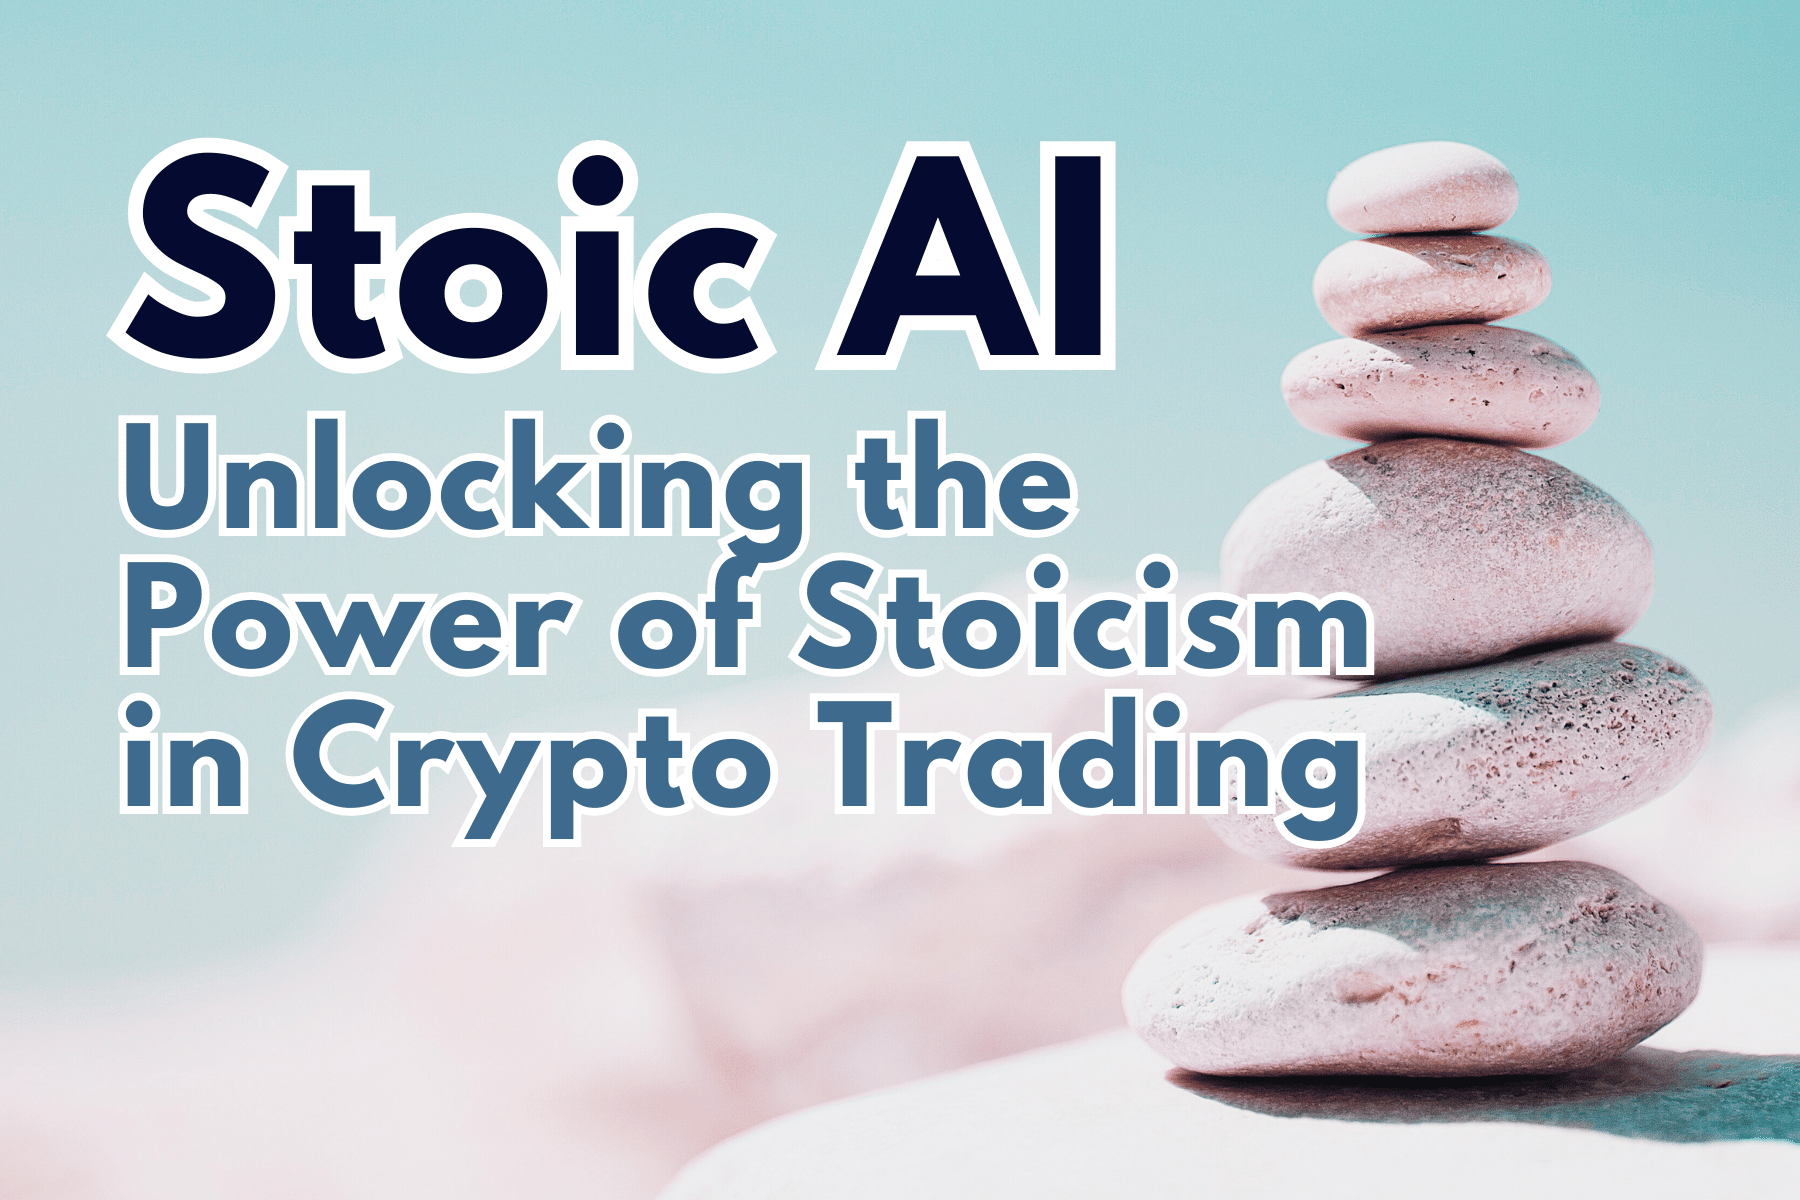 Stoic AI: Unlocking the Power of Stoicism in Crypto Trading